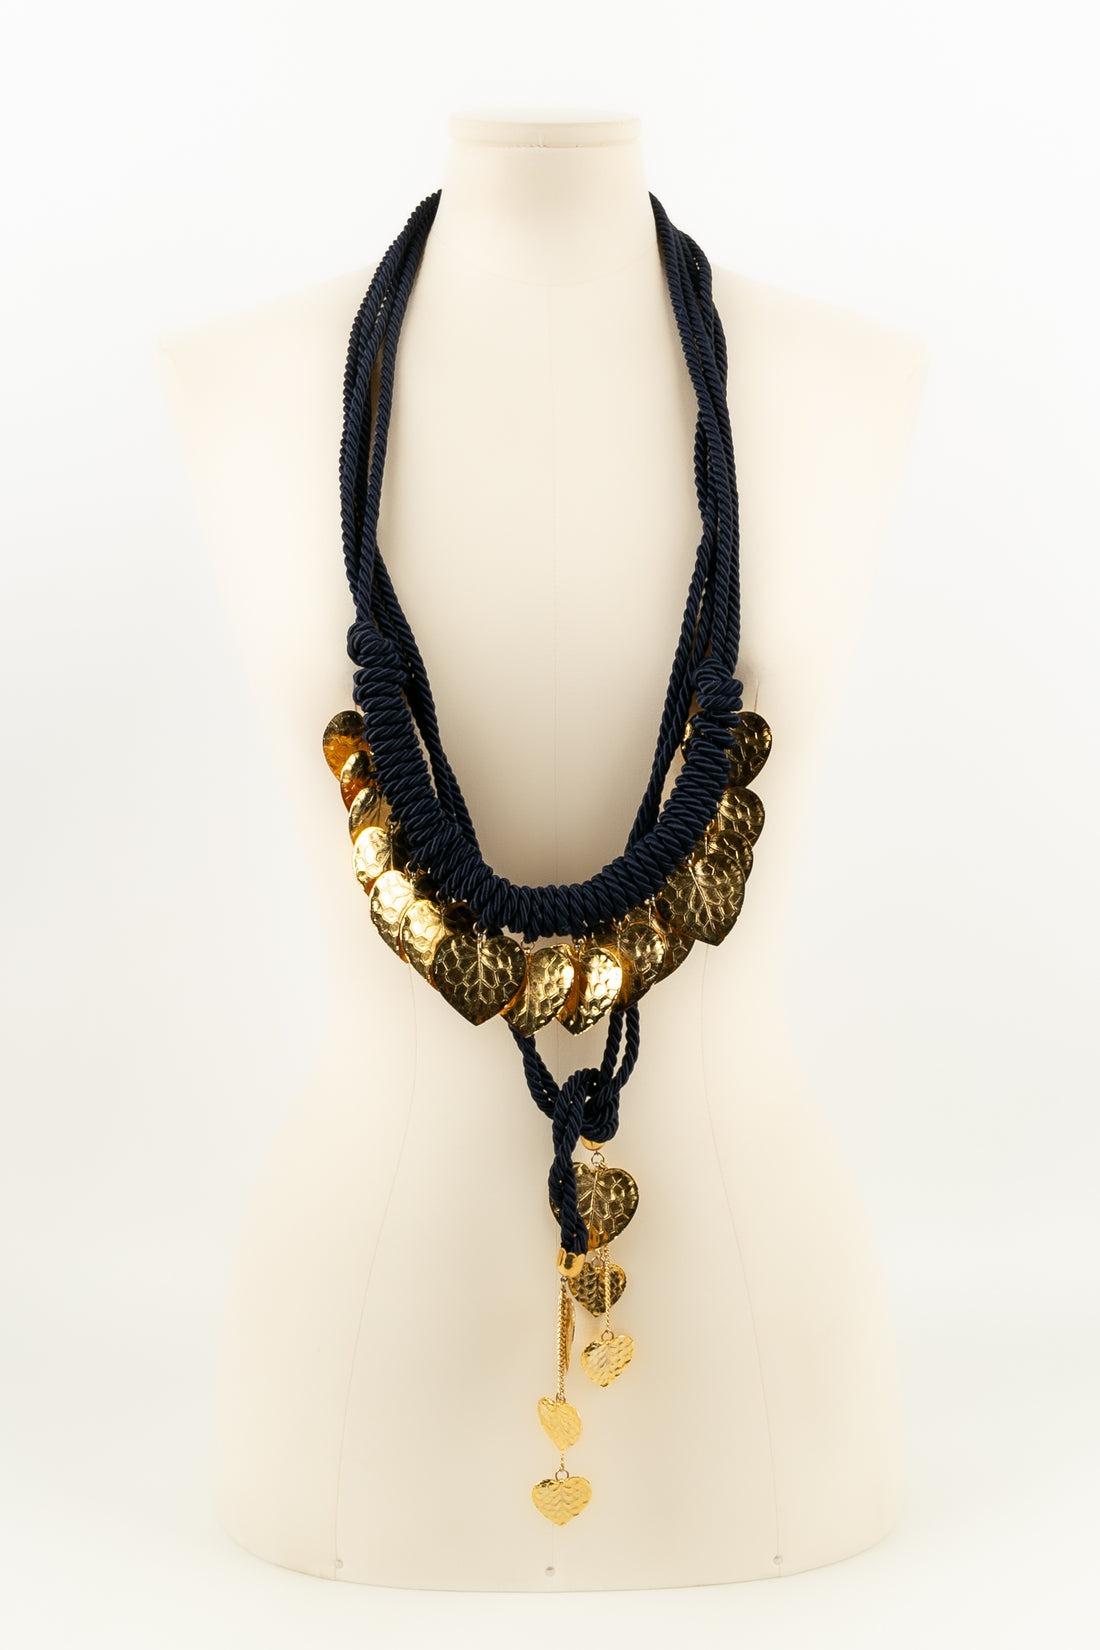  Yves Saint Laurent Belt(Credited to) in Navy Blue & Charms in Gold-Plated Metal For Sale 2